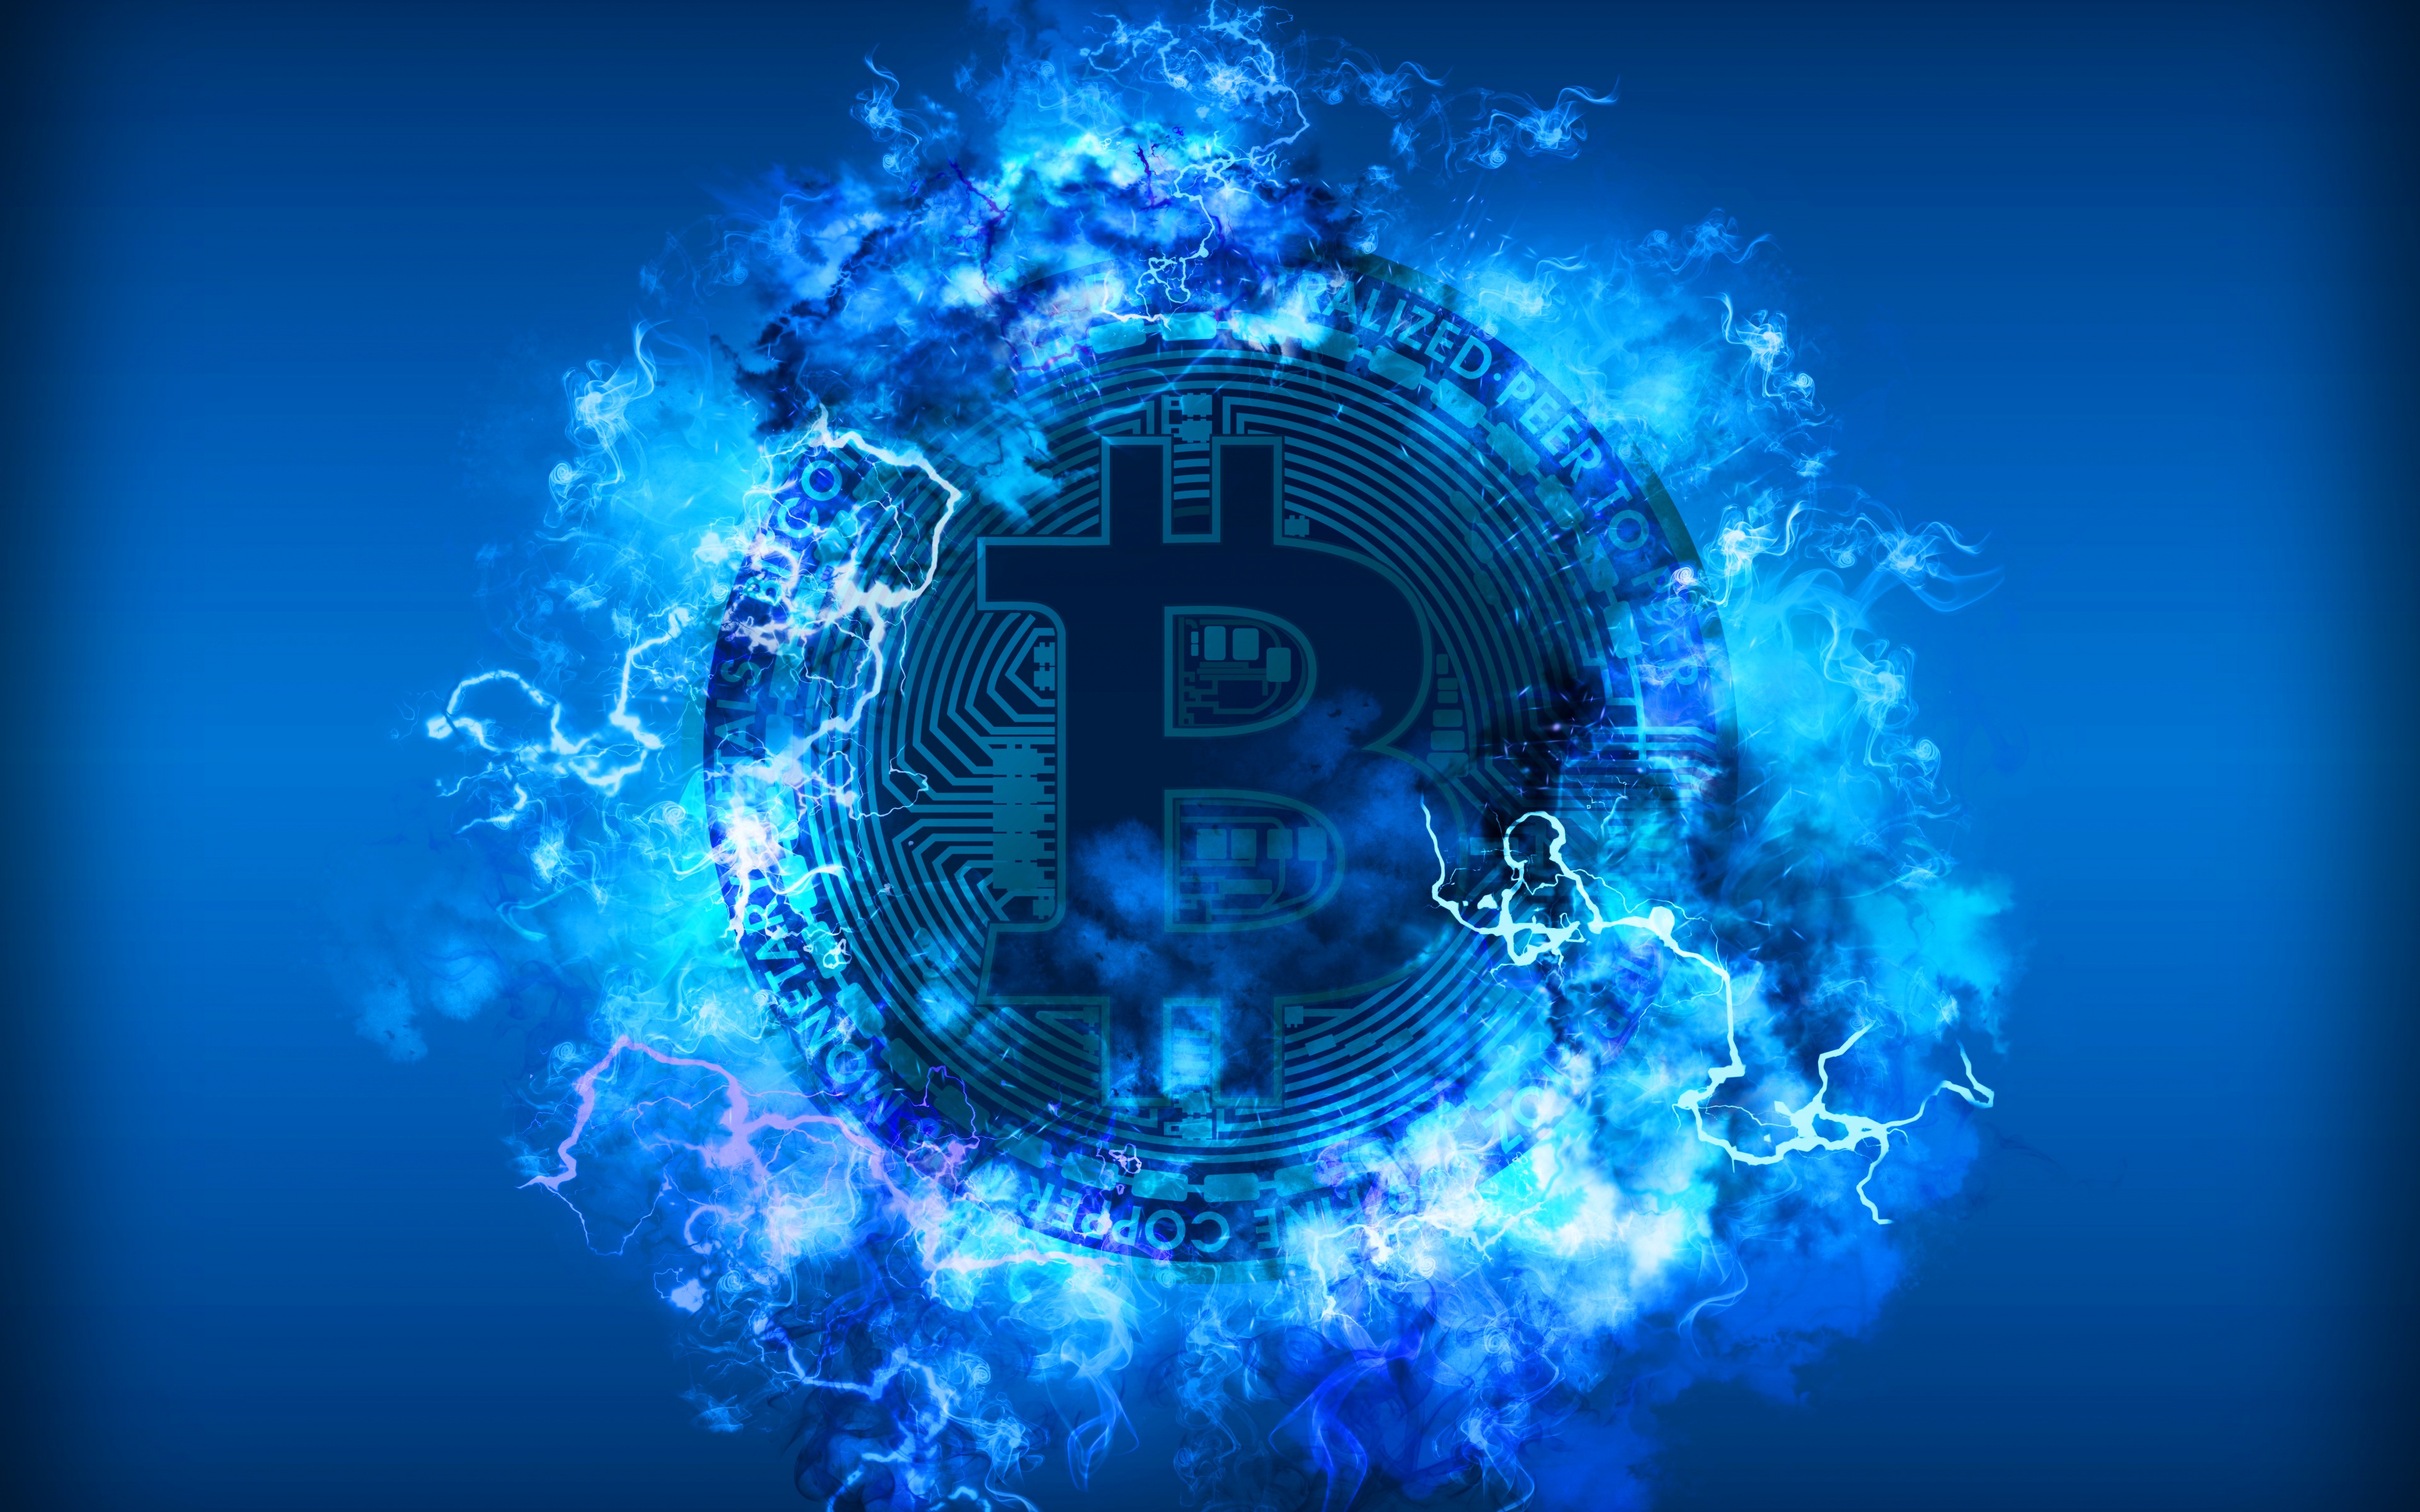 Bitcoin Blue Cryptocurrency 3840x2400